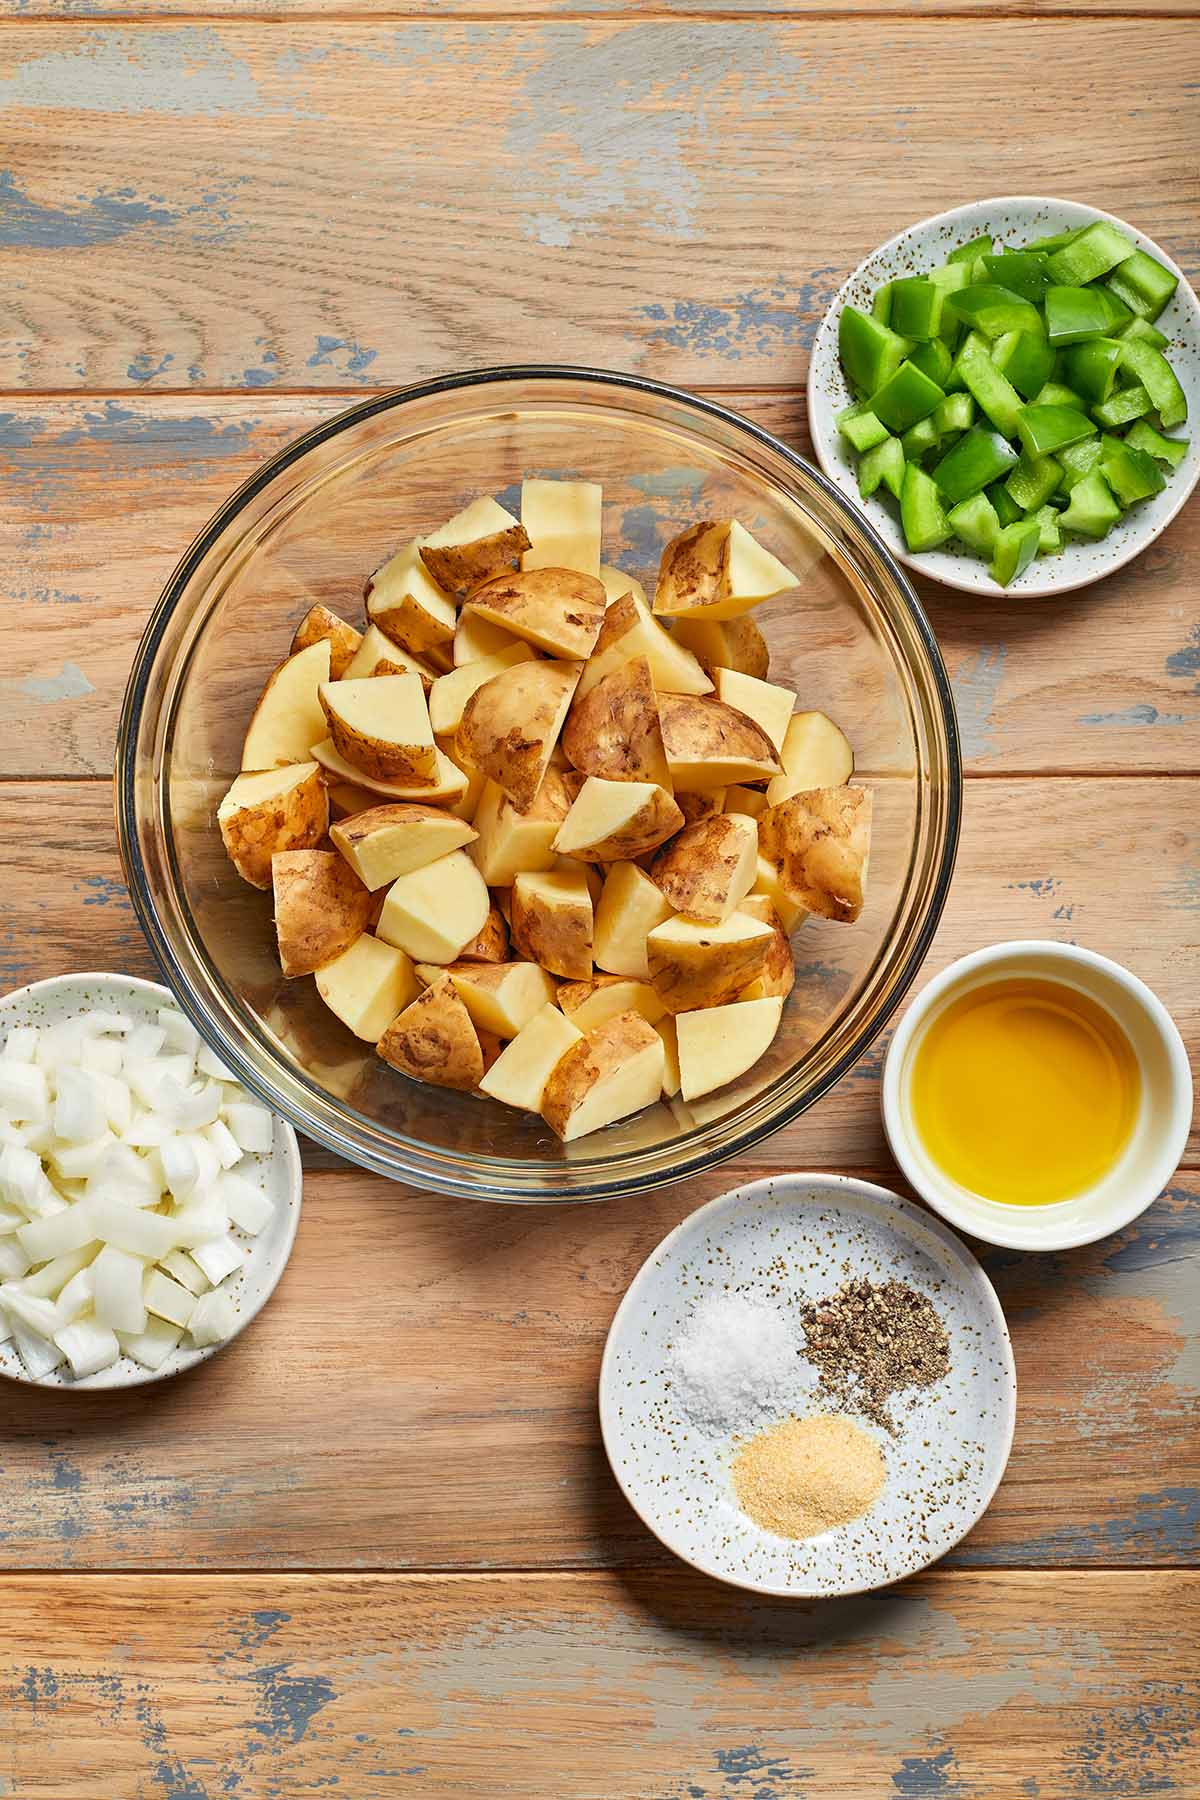 Ingredients to make air fryer home fries arranged in individual dishes on a wooden surface.